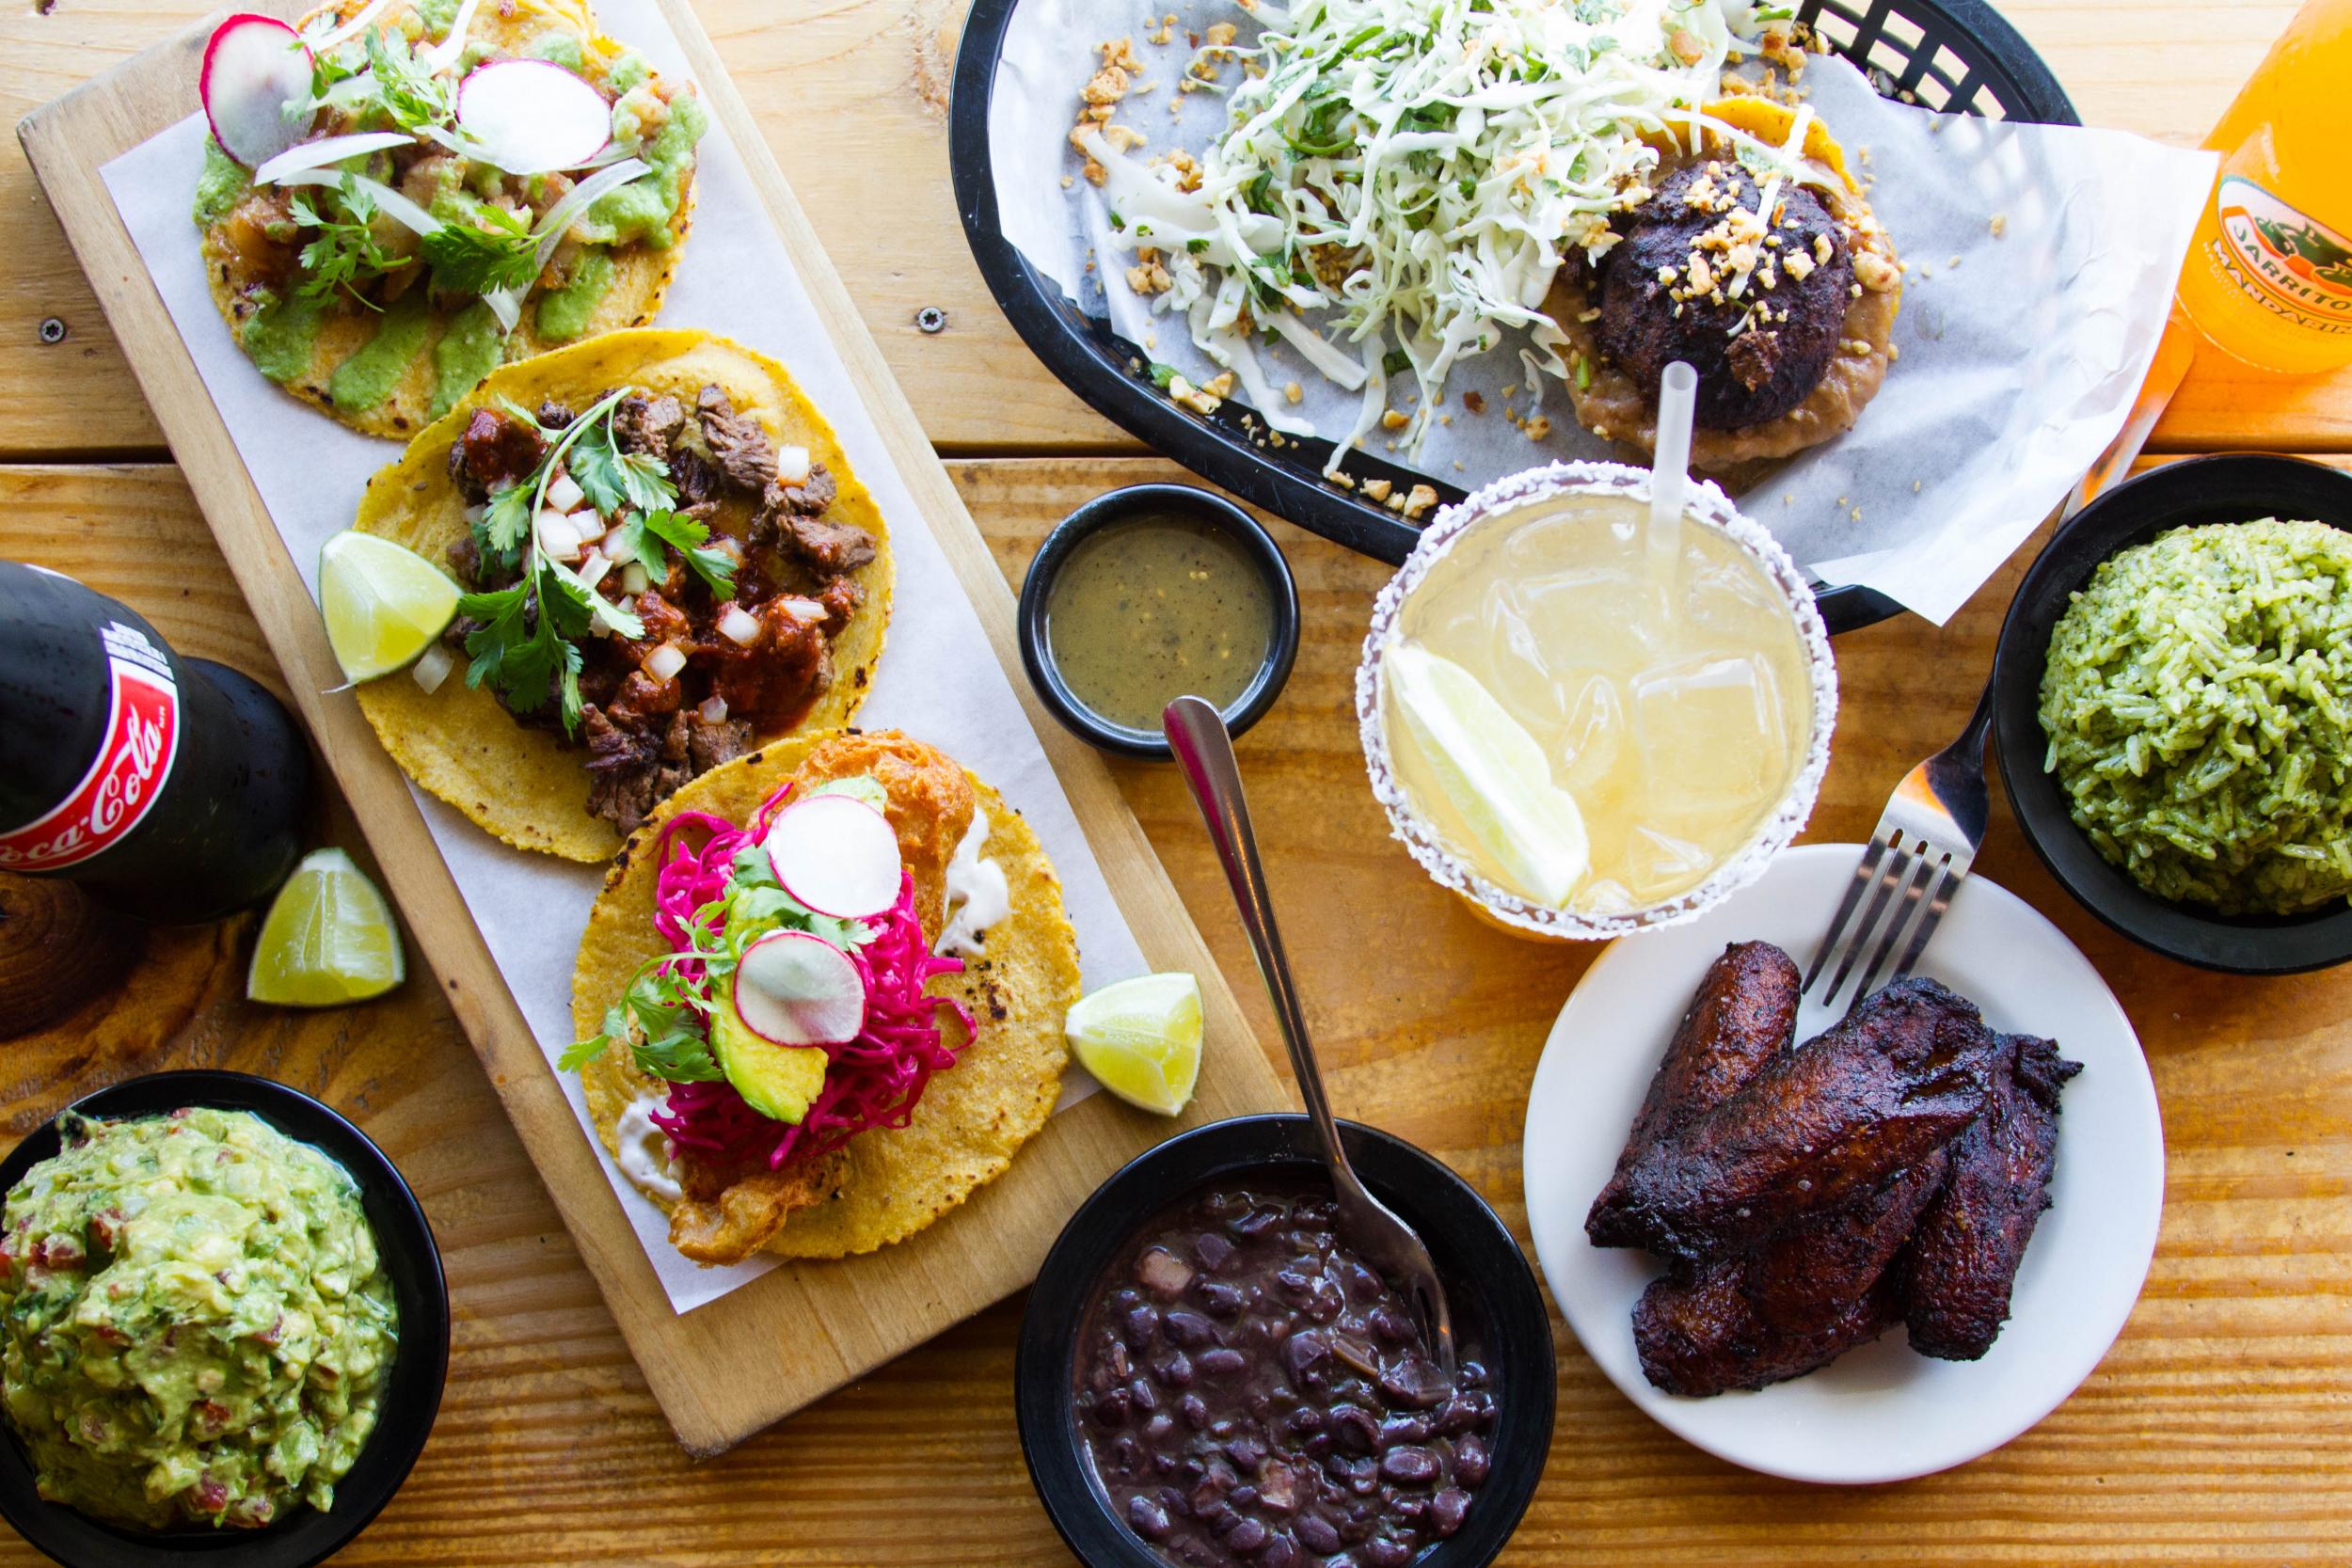 Black Rooster Taqueria offers authentic Mexican cuisine